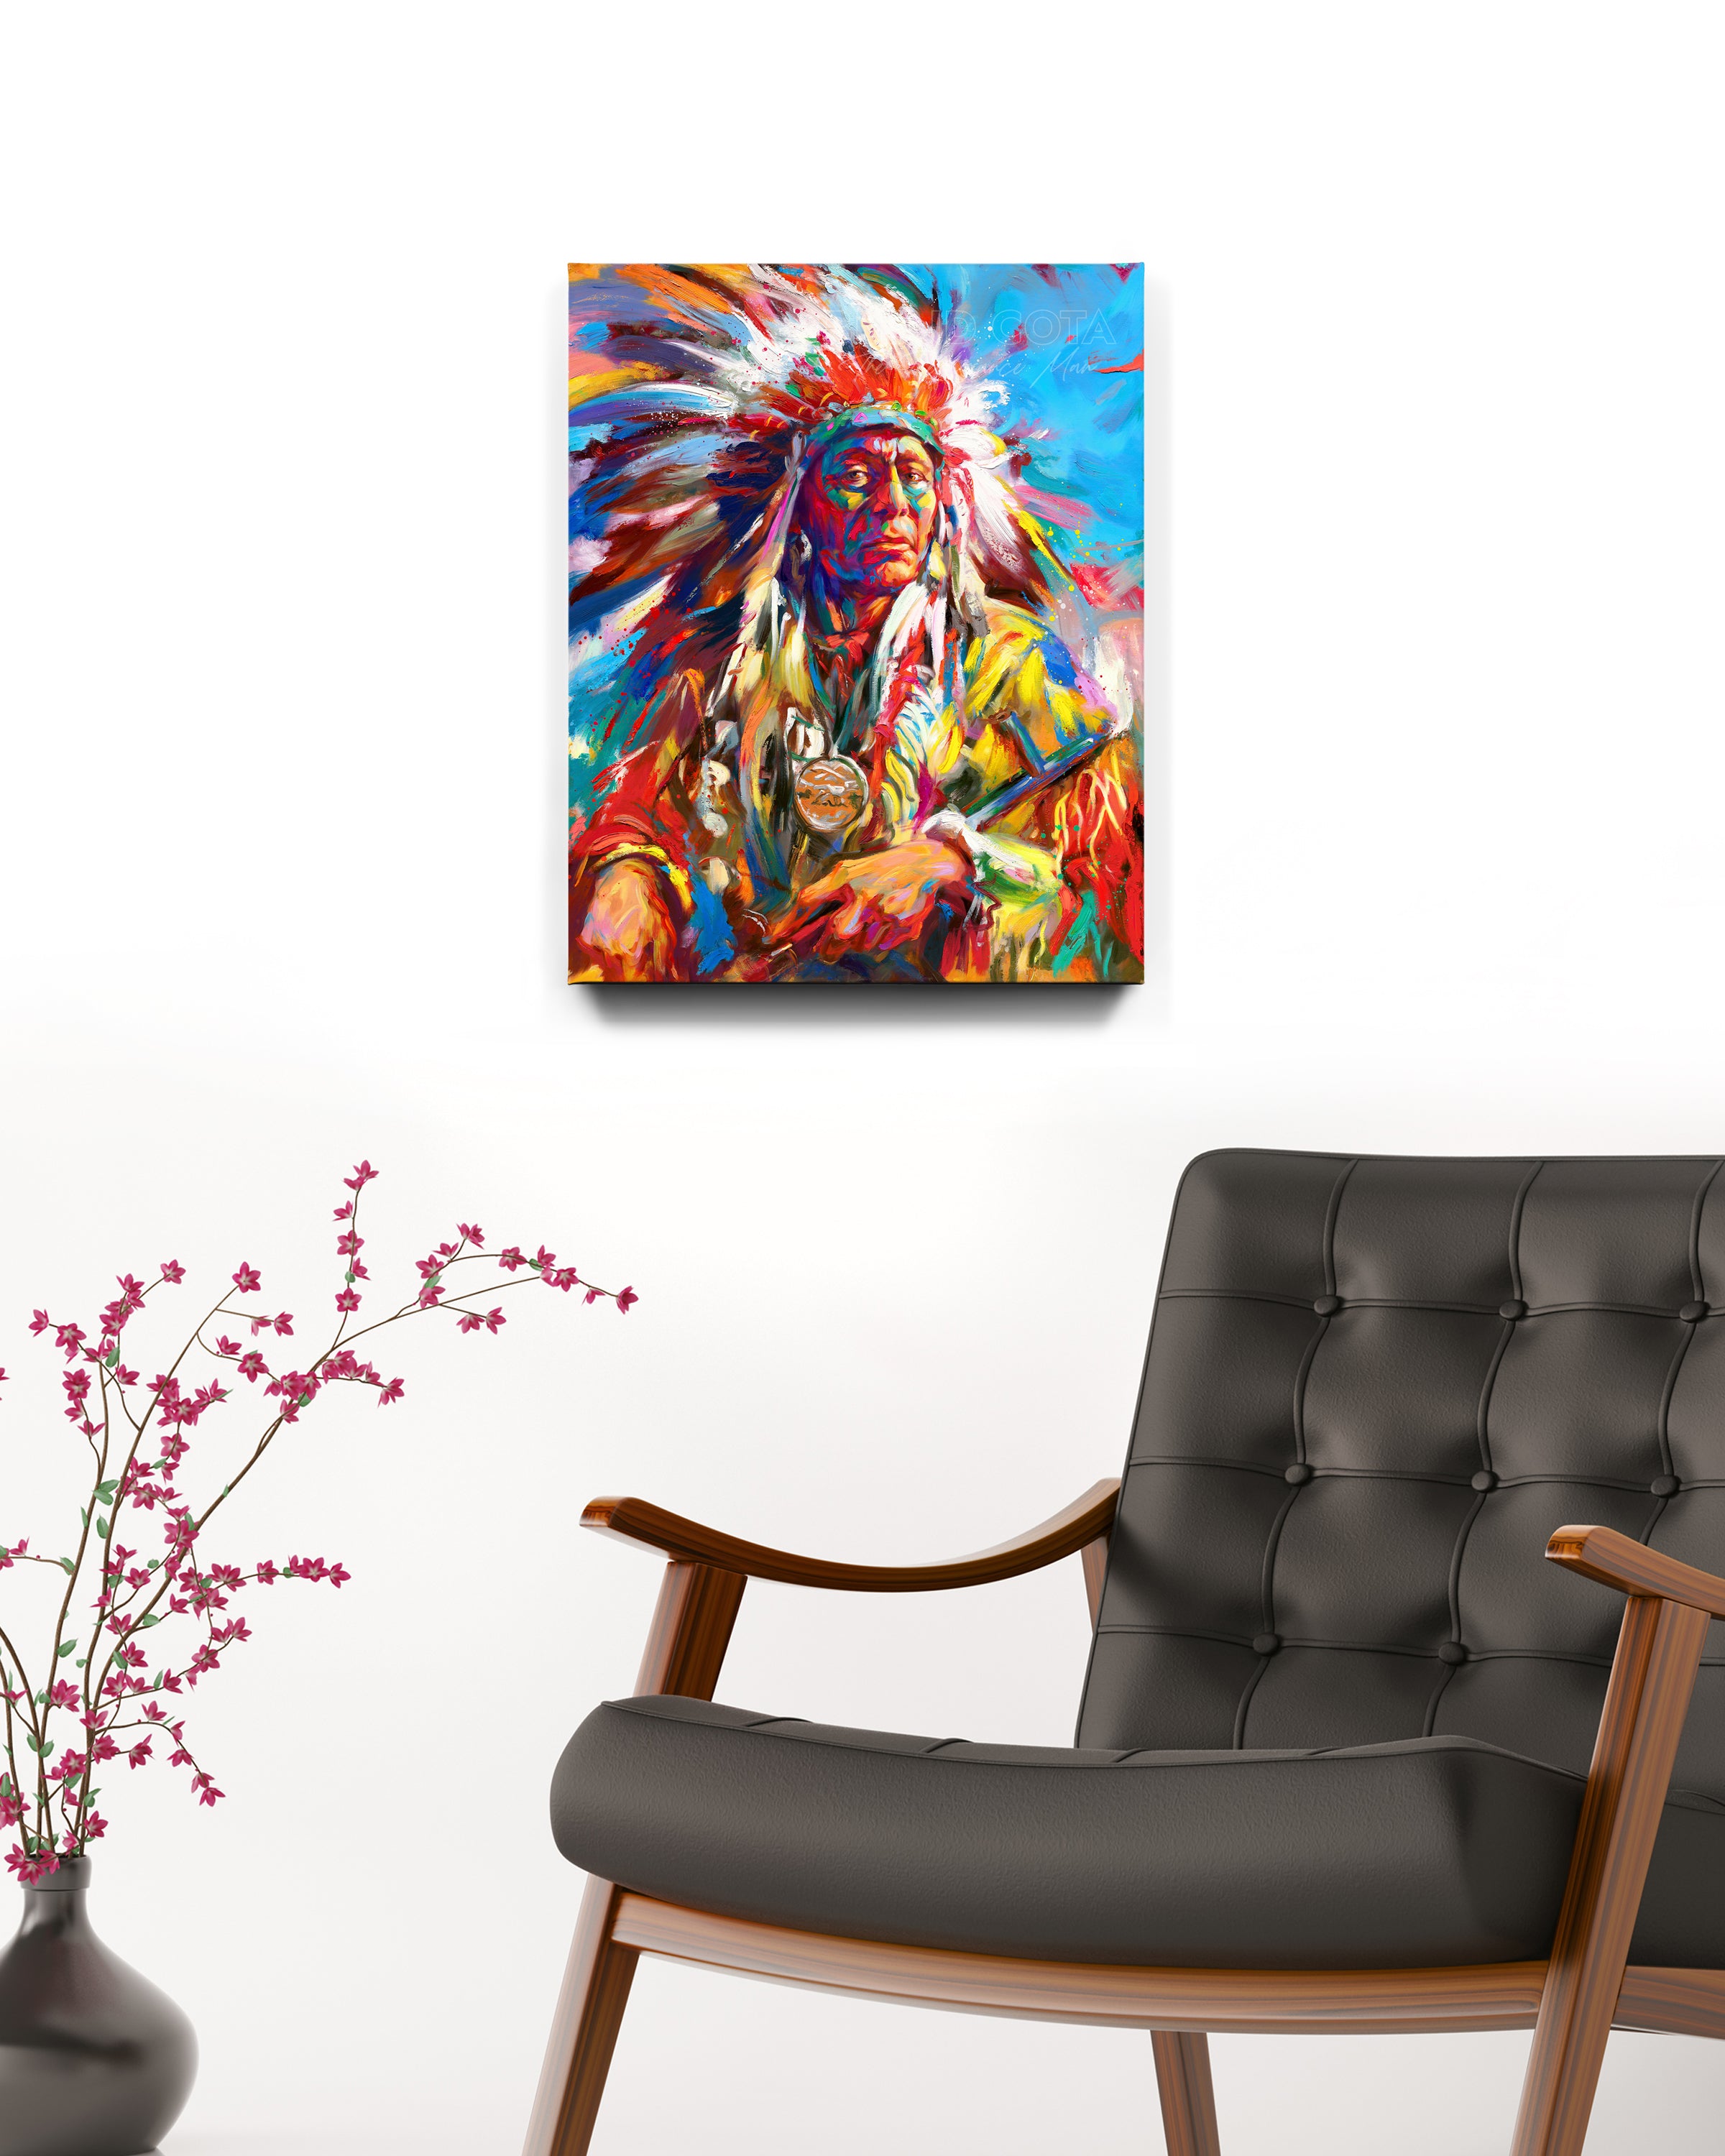 Art print on canvas of the Native American Warrior Portrait in war bonnet, symoblizing the Great Spirit, pride and power, in colorful brushstrokes, color expressionism style.